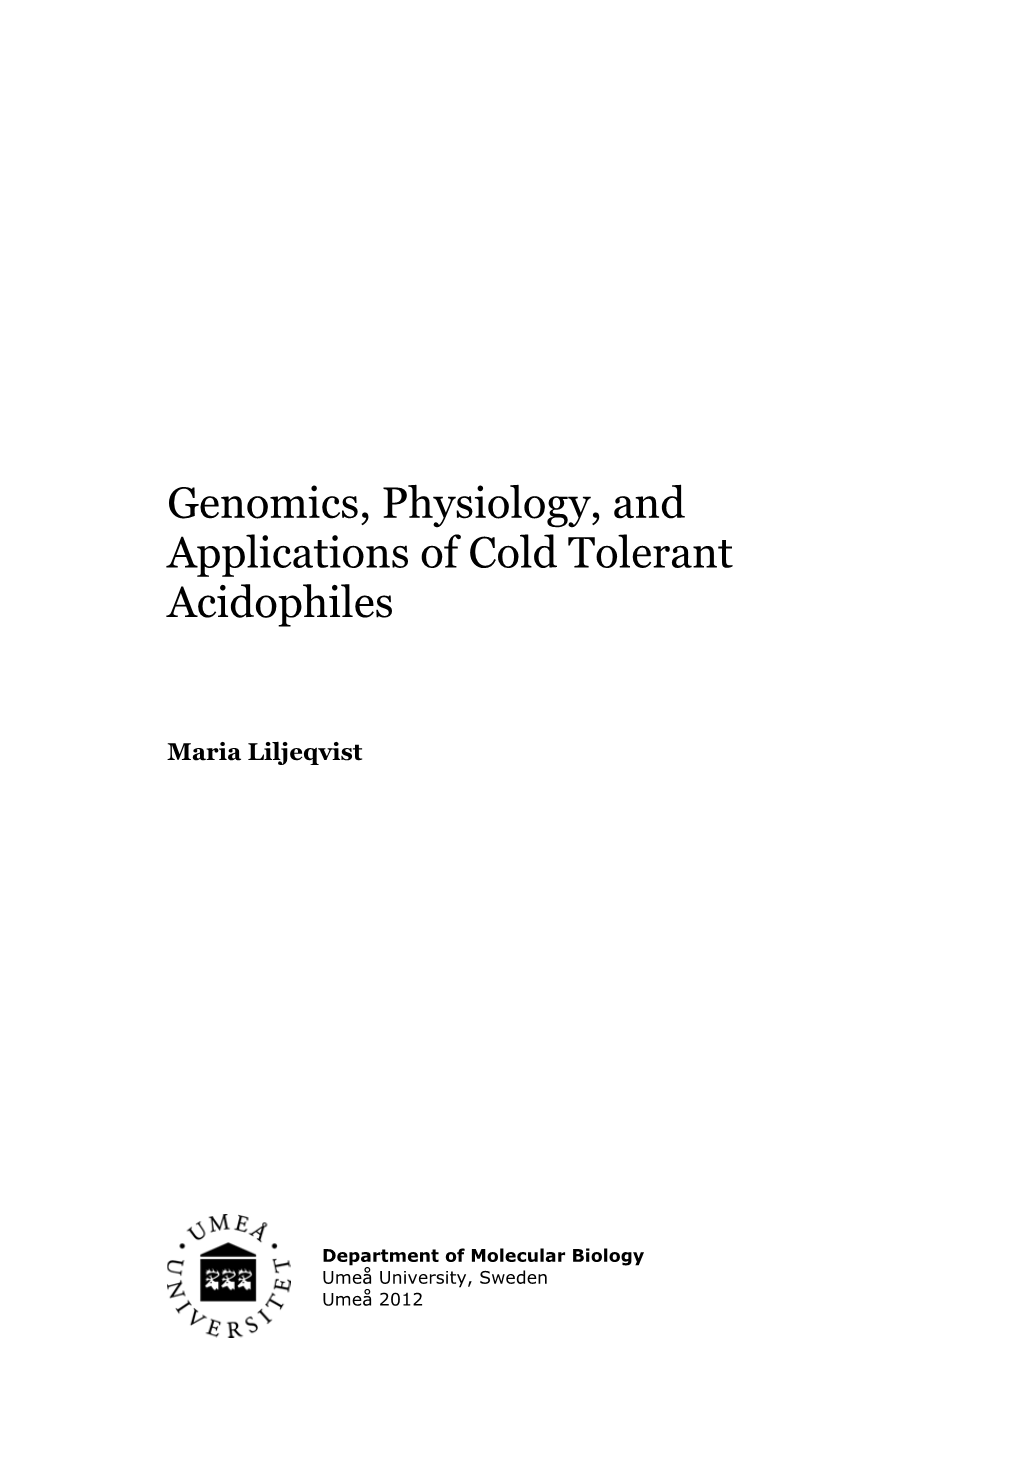 Genomics, Physiology, and Applications of Cold Tolerant Acidophiles